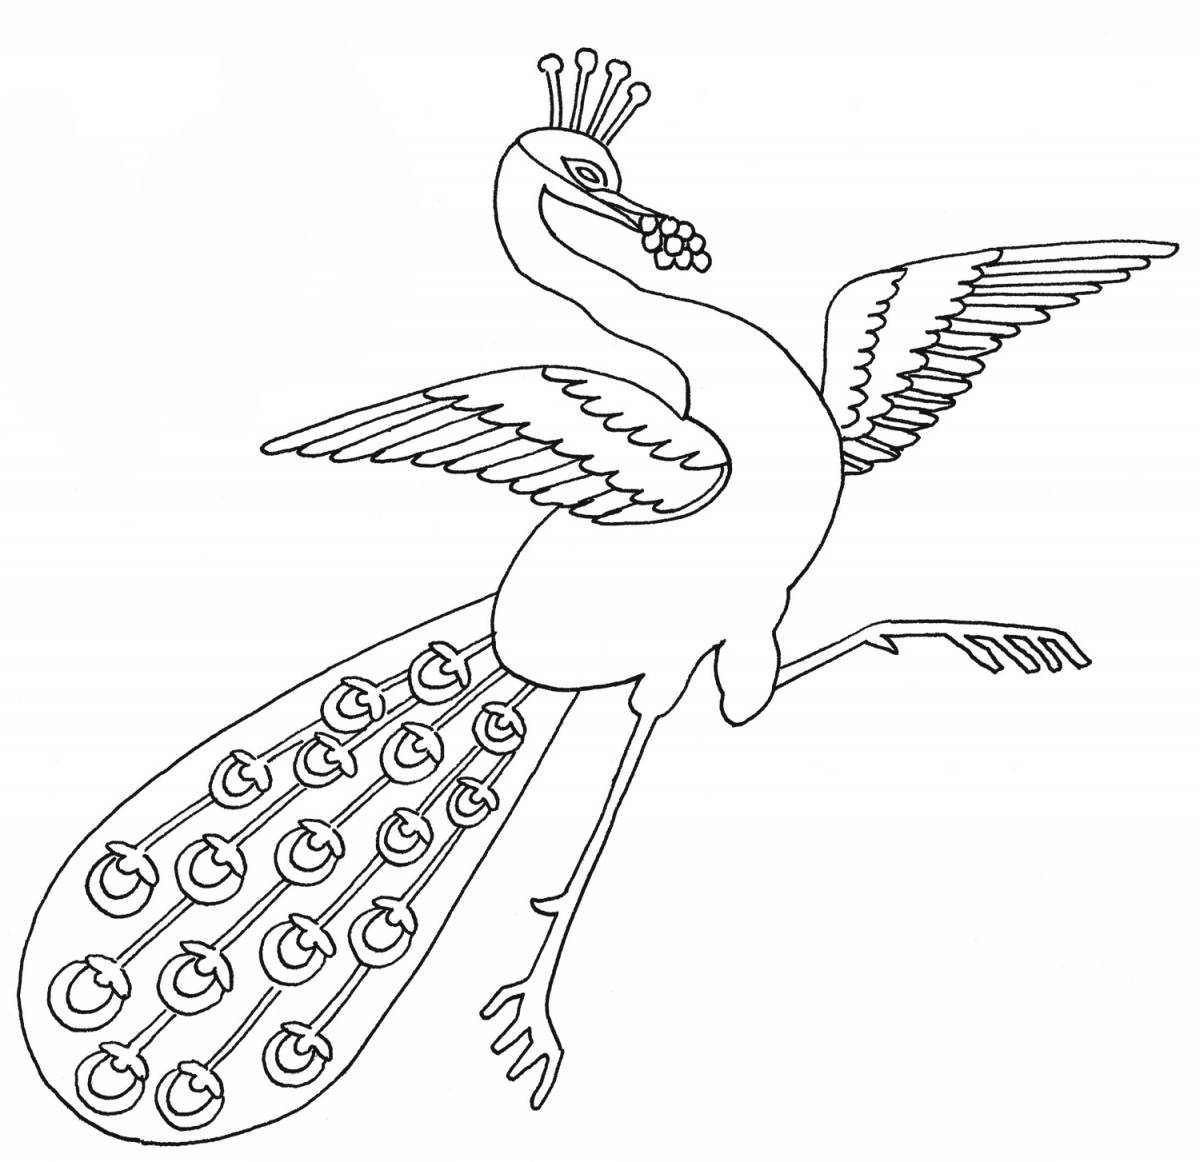 Coloring book dazzling fiery bird for children